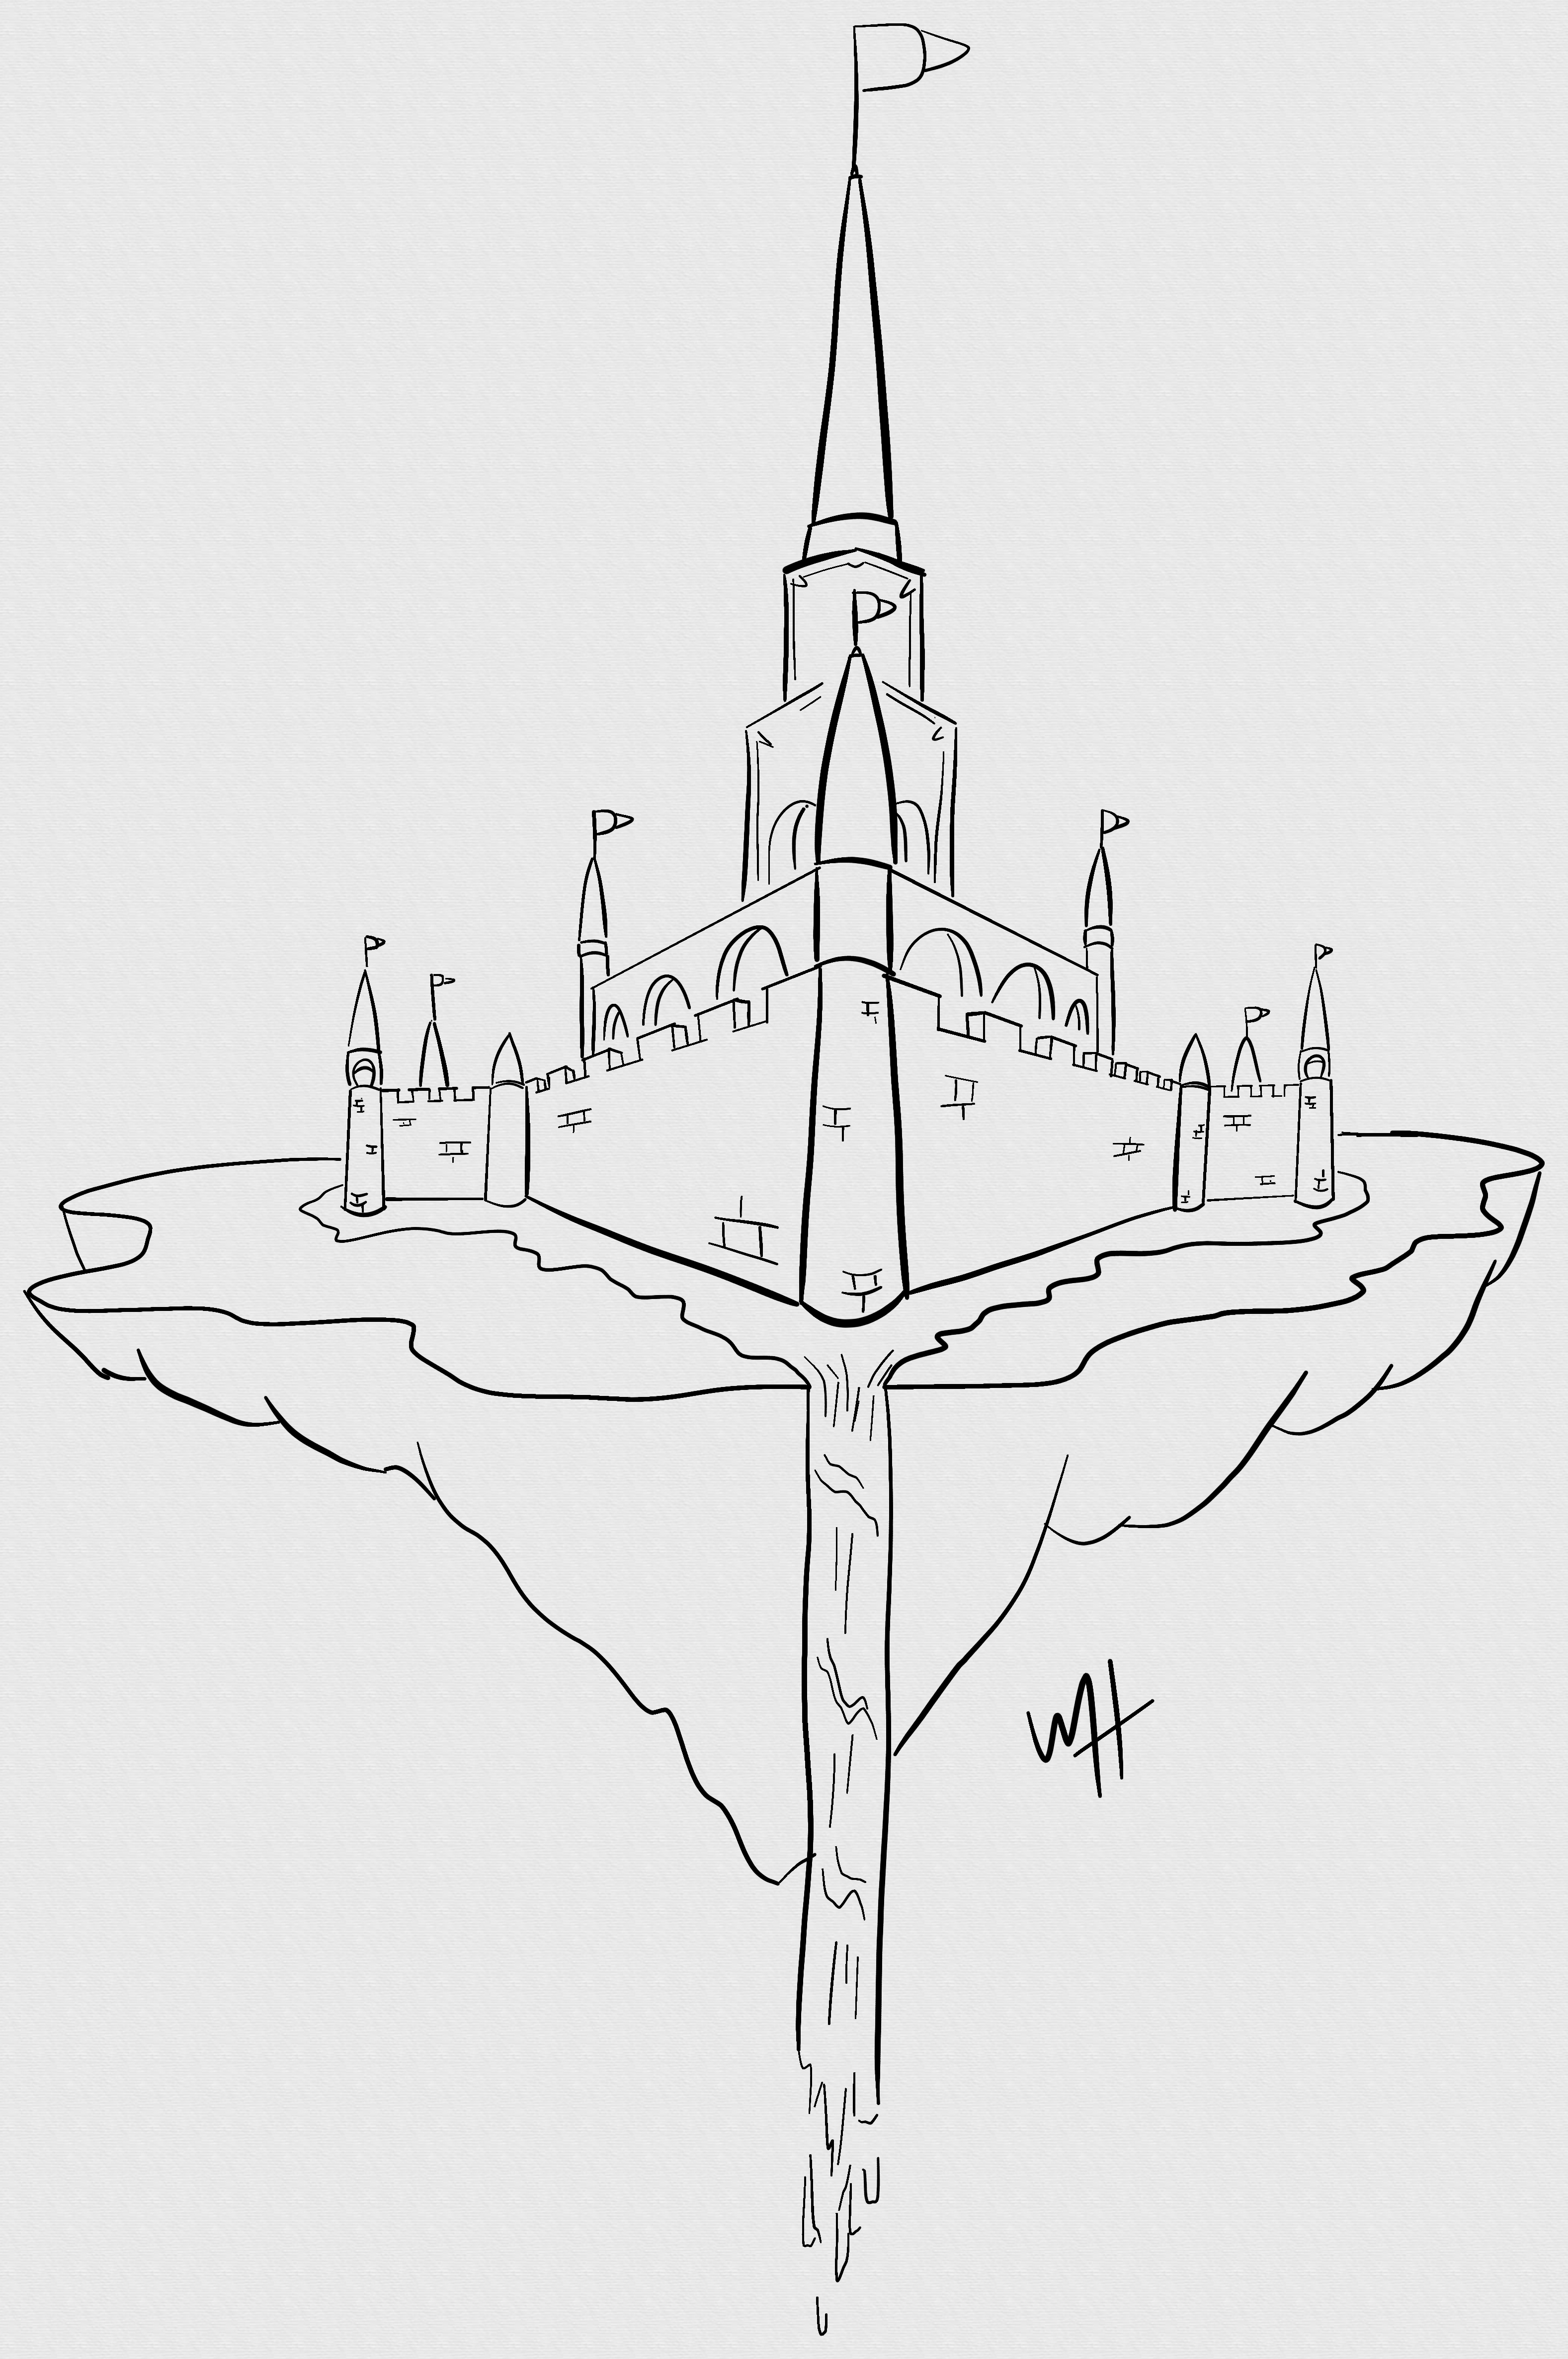 Inktober prompt: castle. A line drawing of a slightly futuristic stone castle on a floating island in the sky or space.